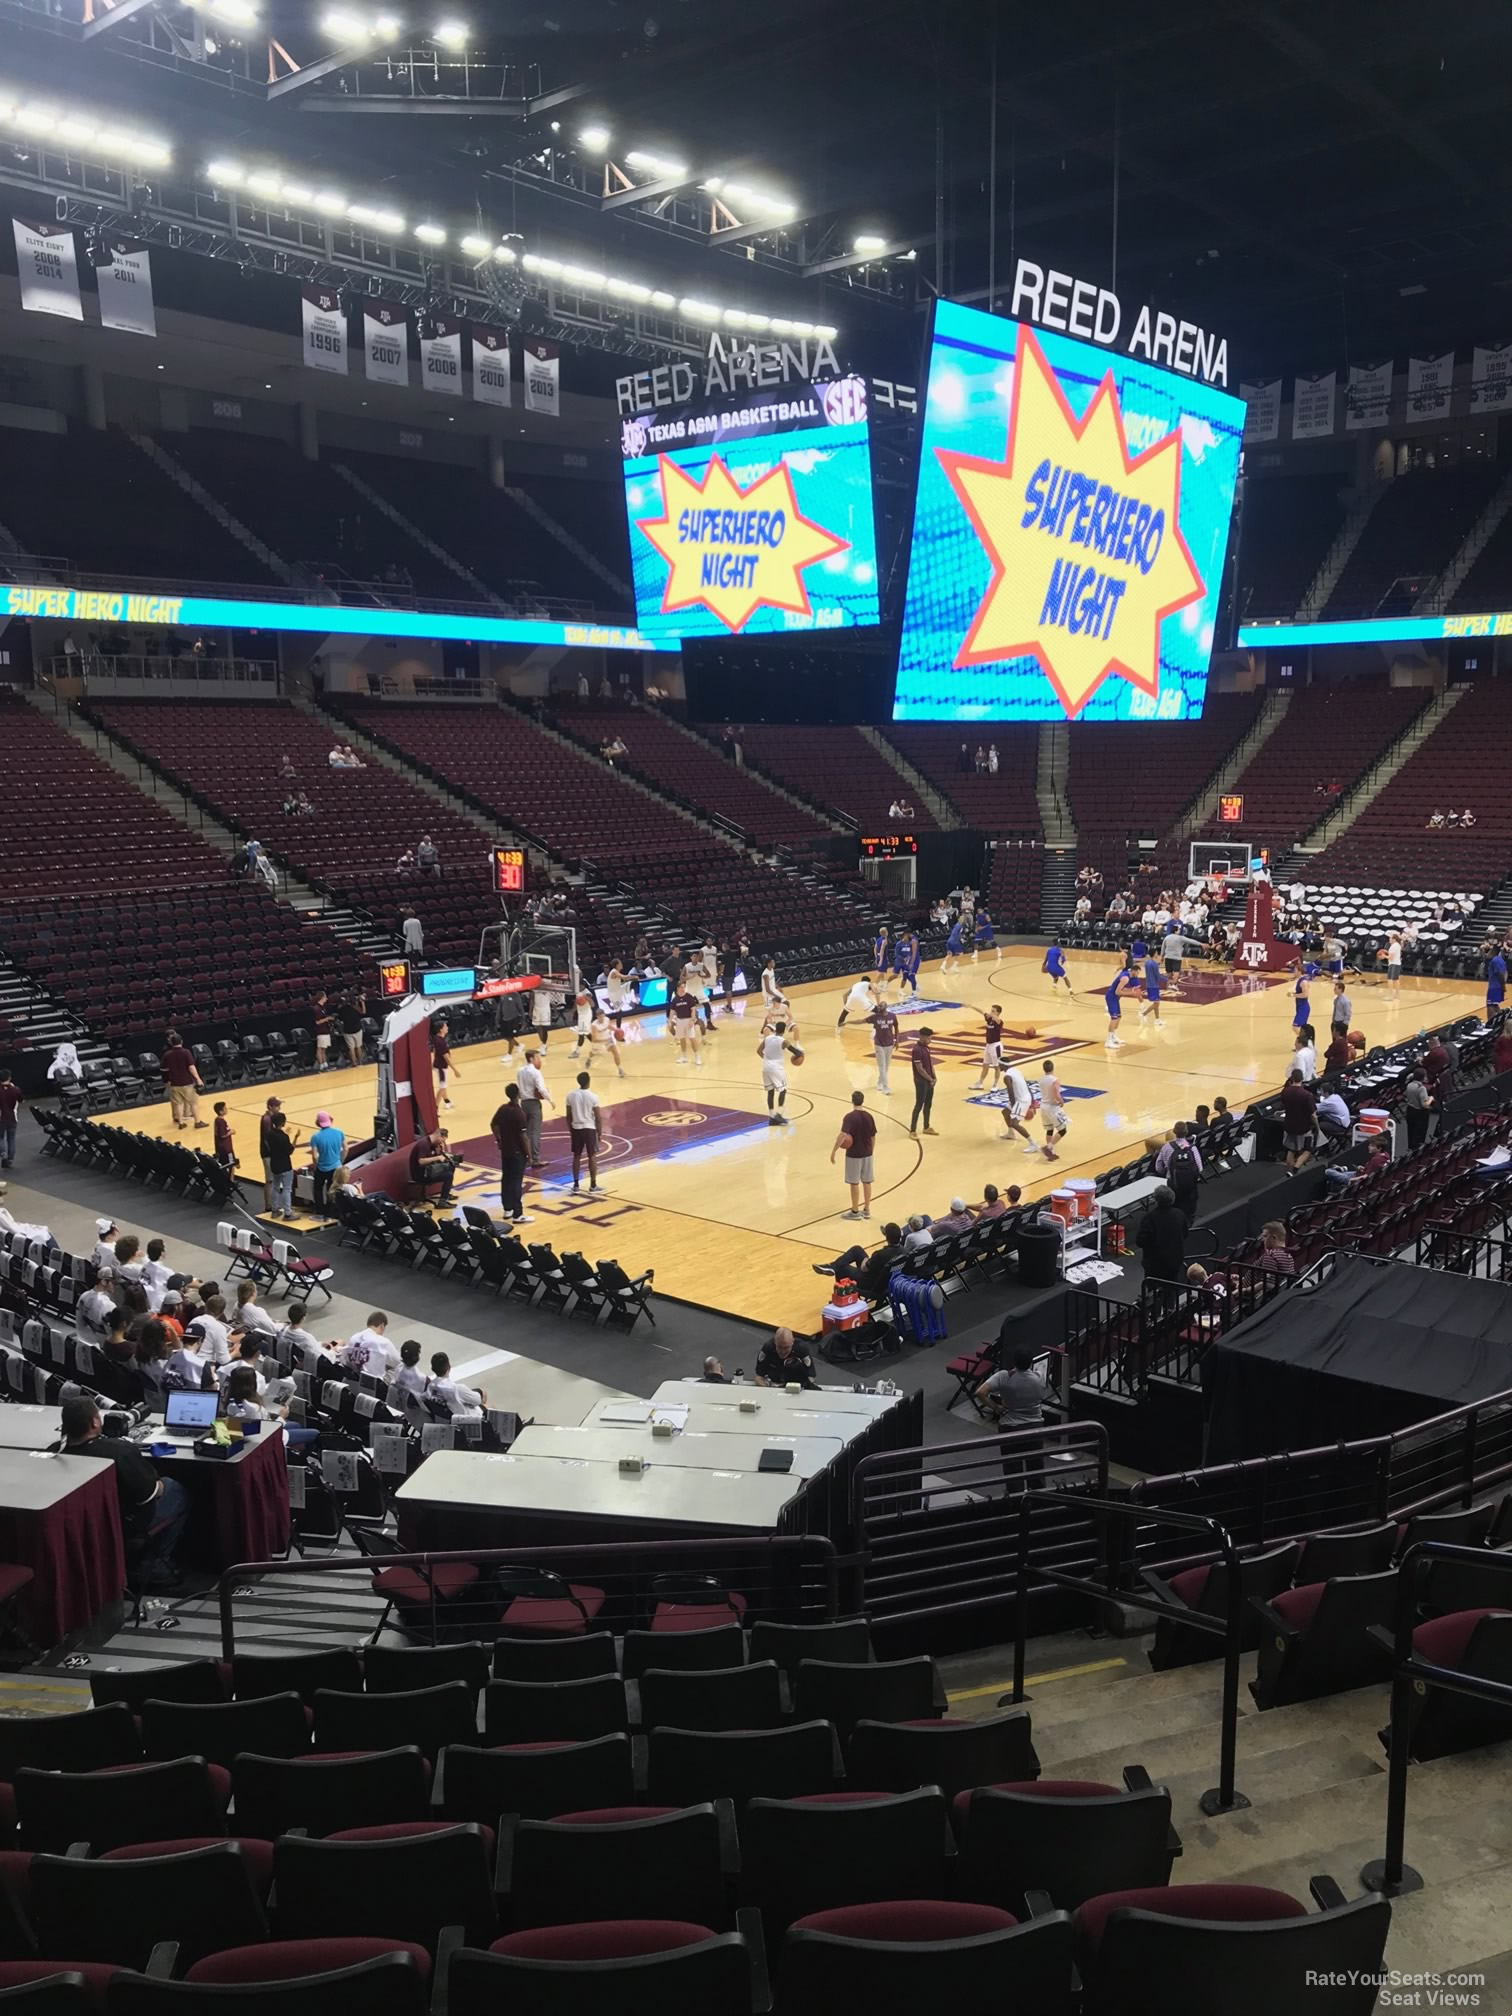 section 125, row j seat view  - reed arena